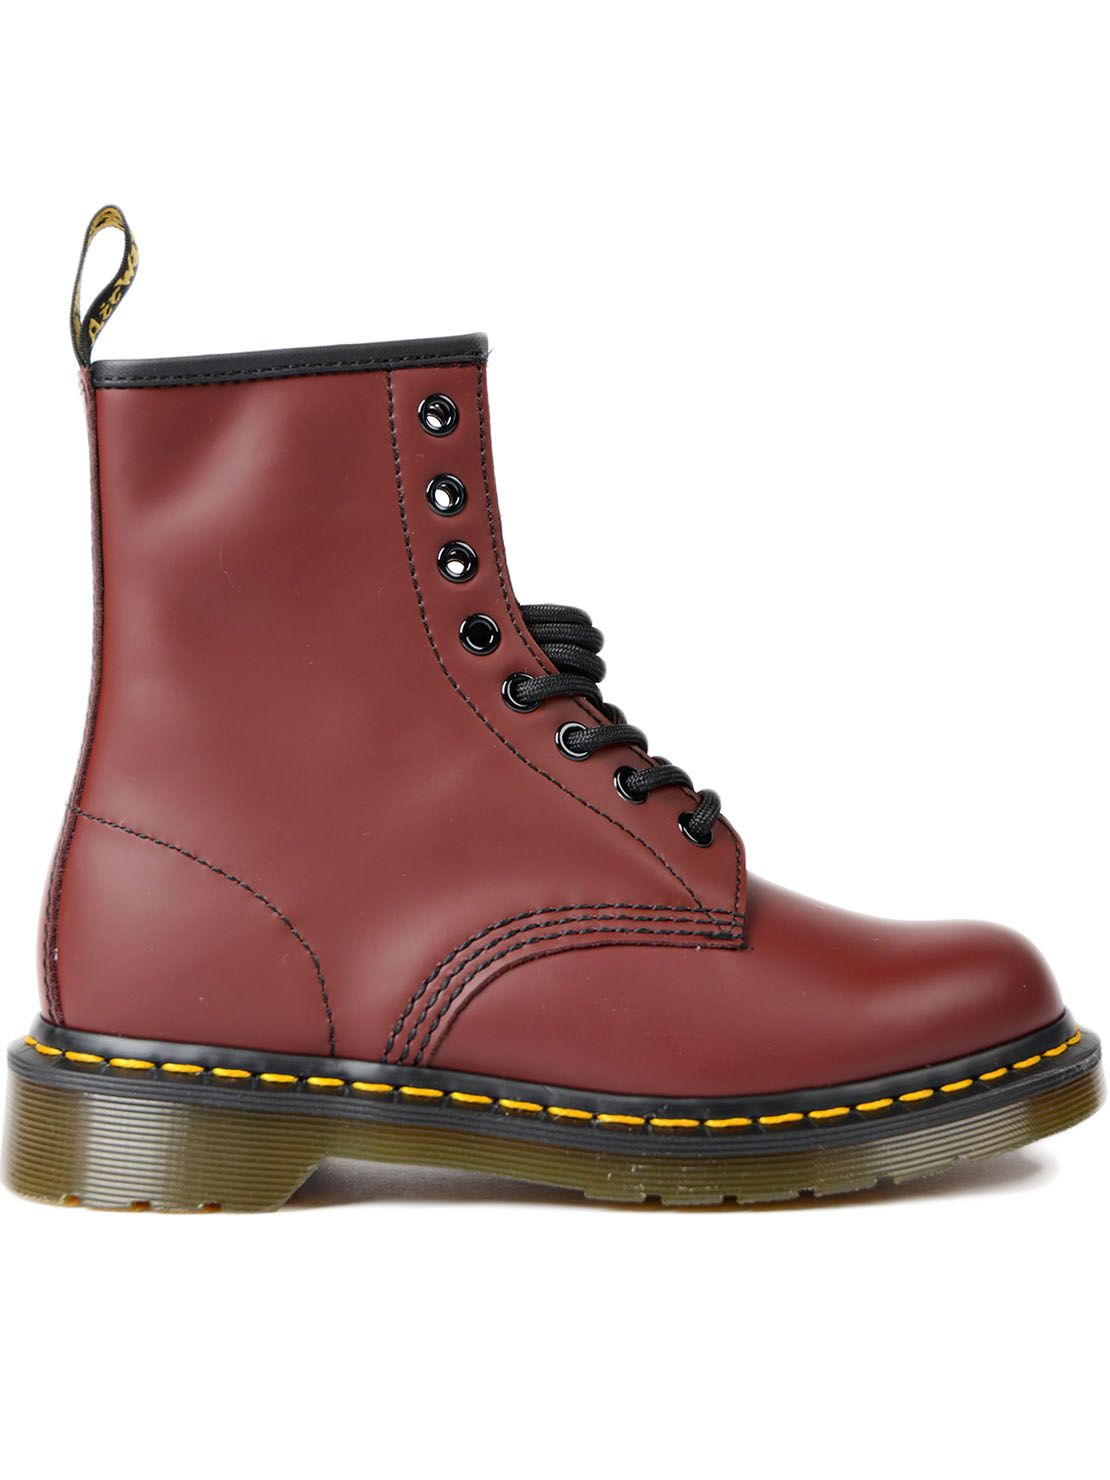 DR. MARTENS BORDEAUX SMOOT BRUSHED LEATHER LOW BOOT, CHERRY+RED | ModeSens